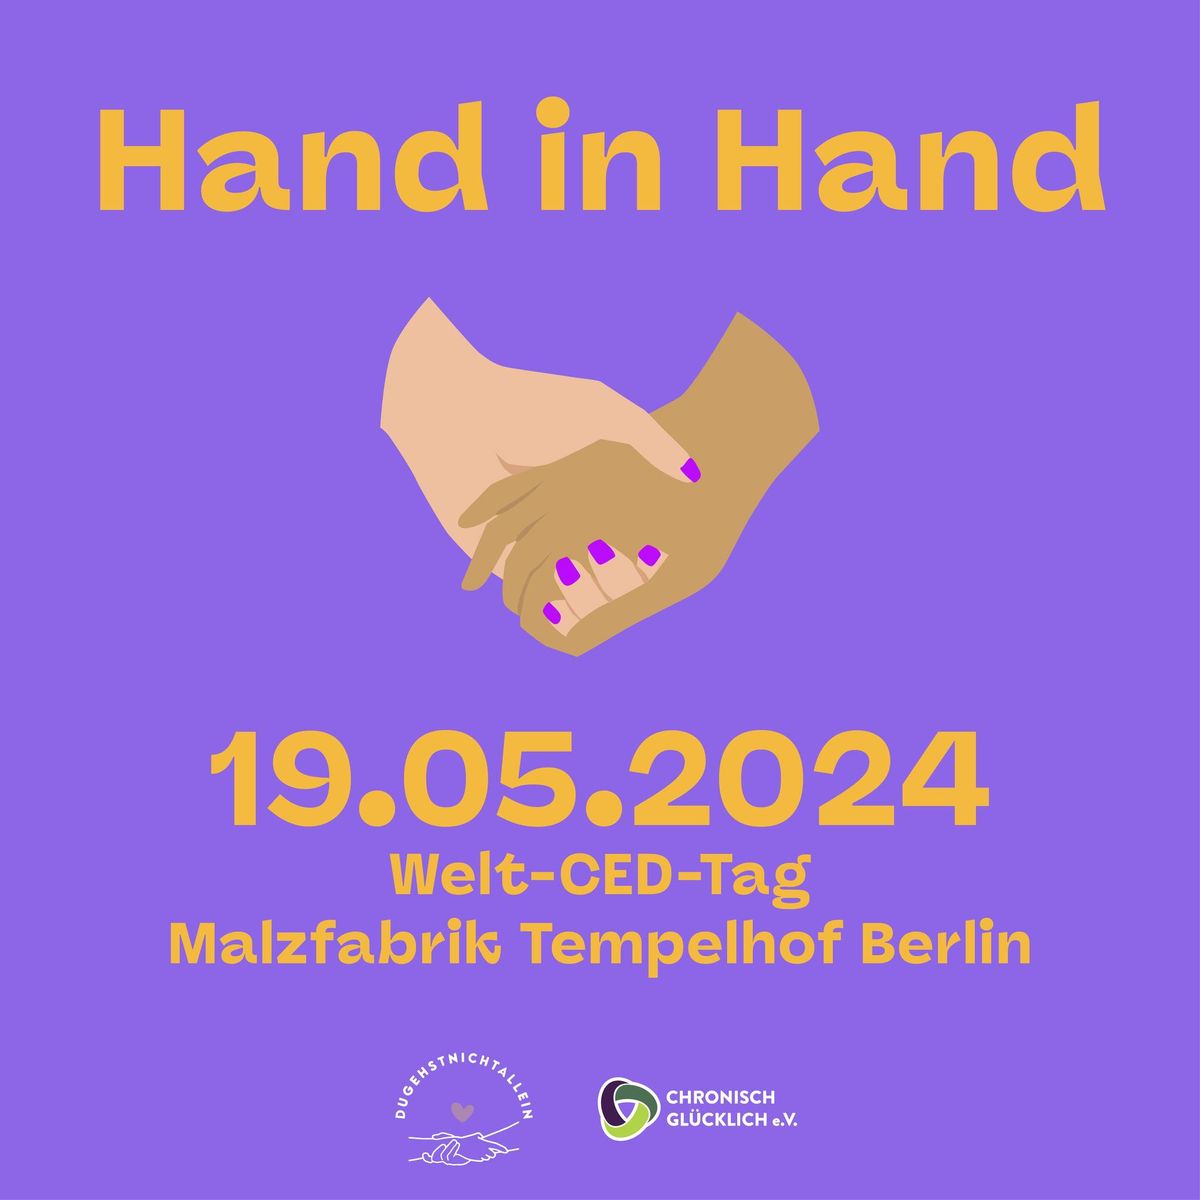 Hand in Hand - Event zum Welt-CED-Tag 